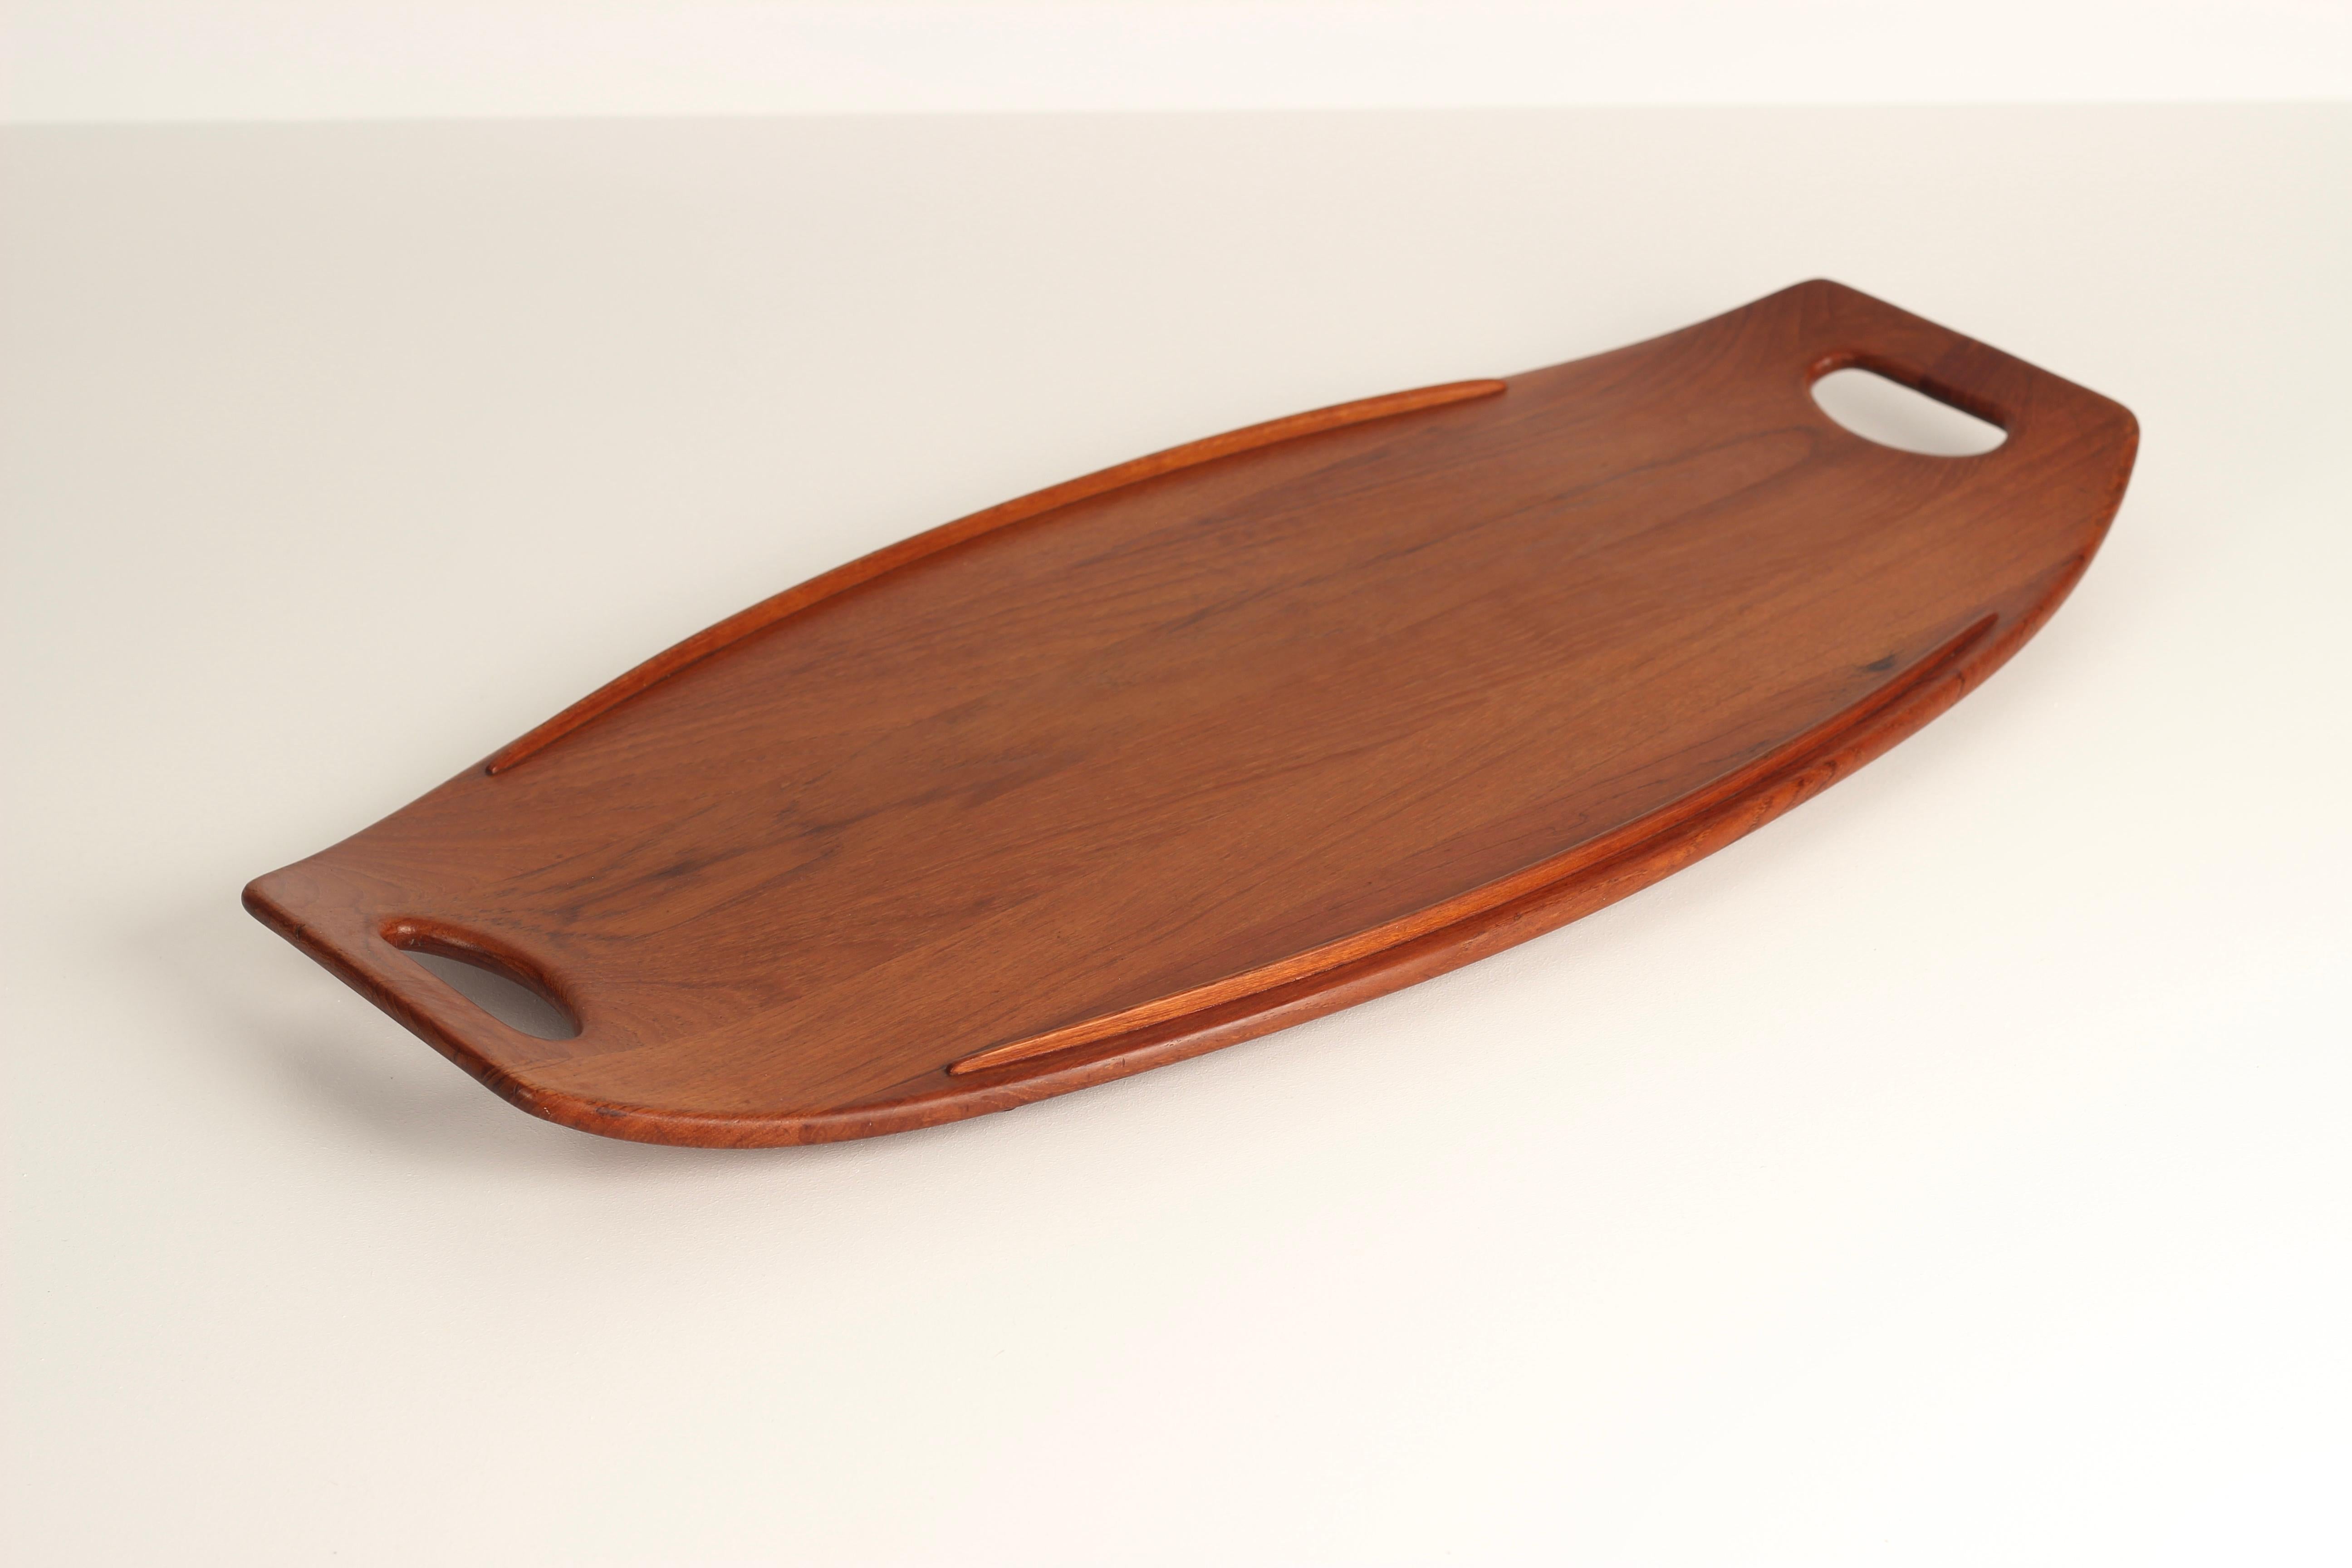 A Mid-Century Modern (Scandinavian Modern) Danish teak tray designed by Jens Quistgaard for Dansk of the USA.

A Teak tray designed by the highly regarded and very collected Jens Harald Quistgaard, a Danish sculptor, artist and industrial